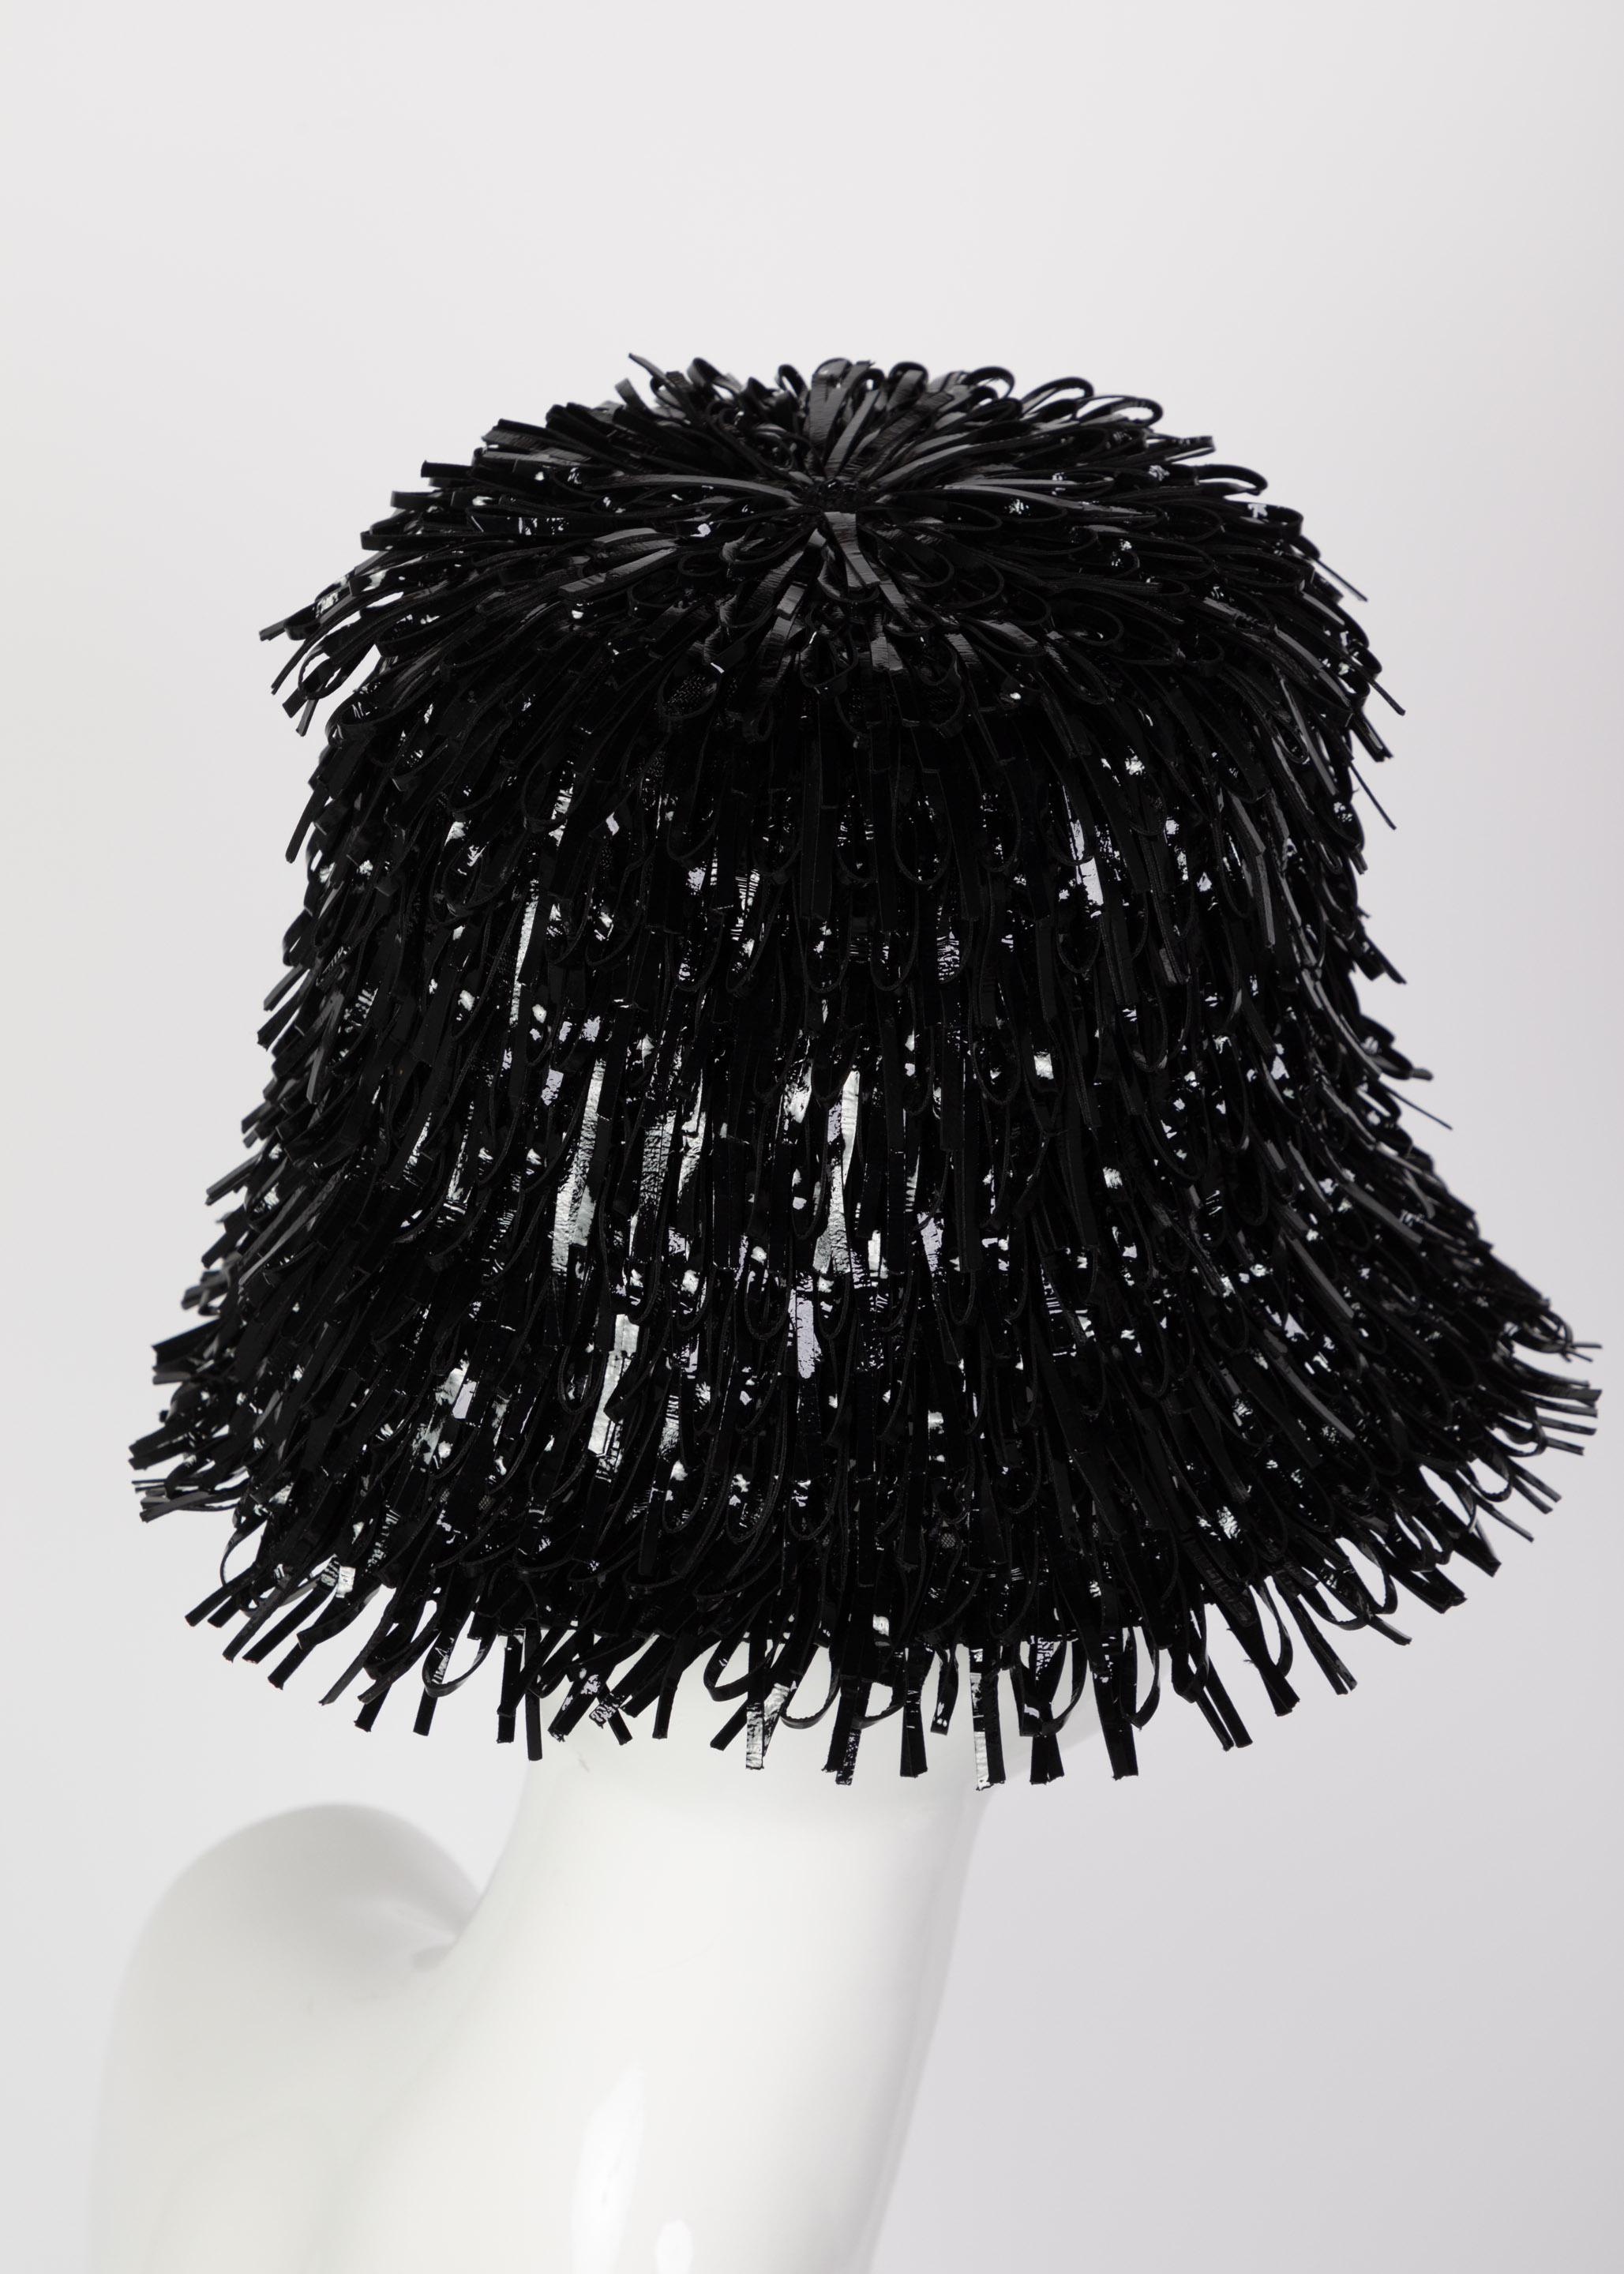 Balenciaga Black Faux Patent Leather Hat Resort 2014 In Excellent Condition For Sale In Boca Raton, FL